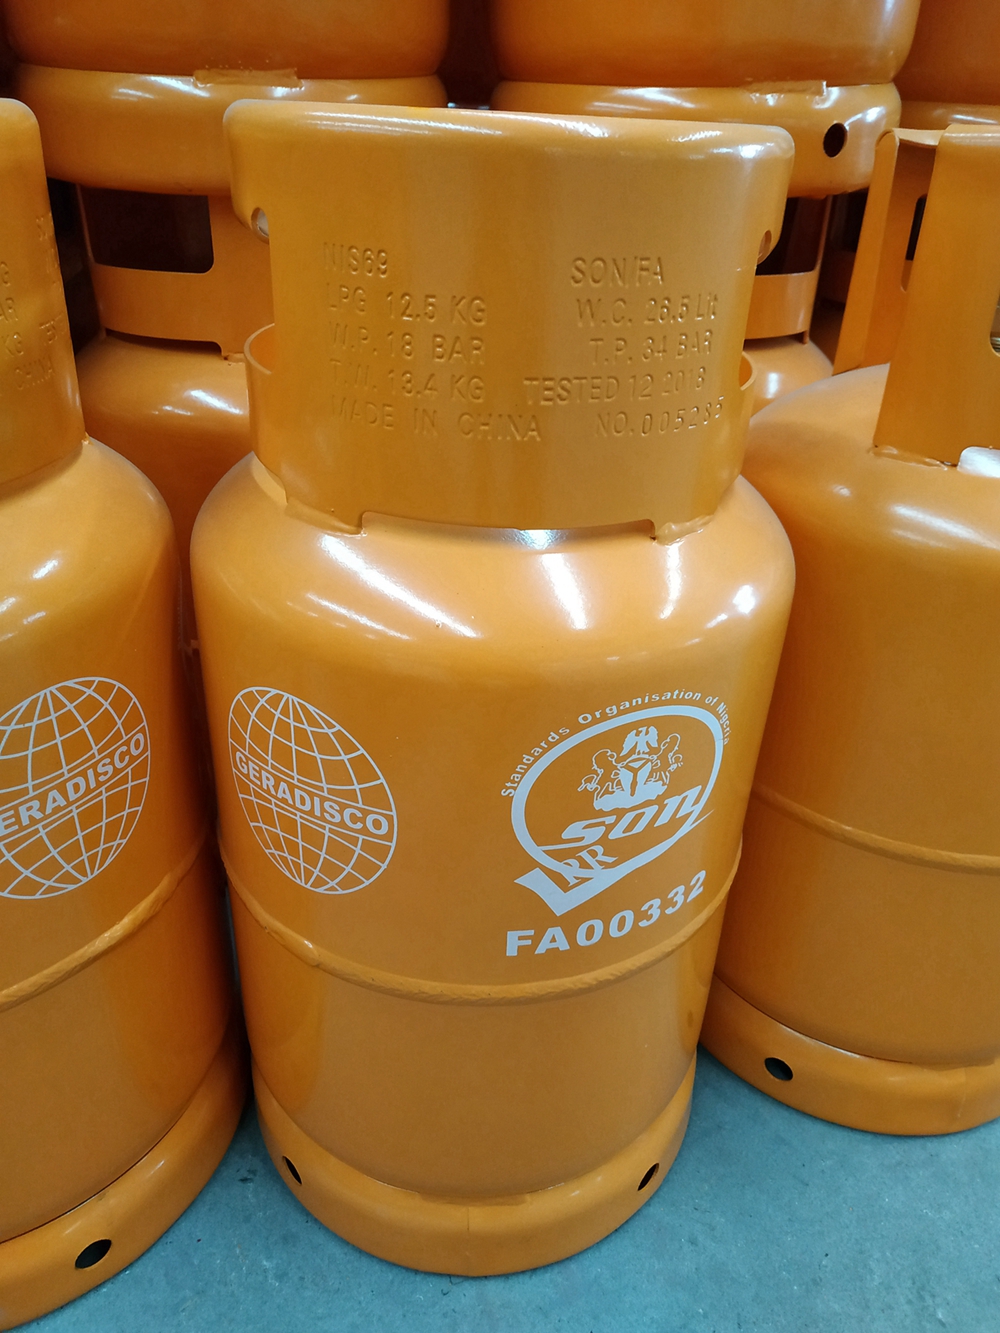 Importation of LPG cylinders into Nigeria SONCAP Certification needed